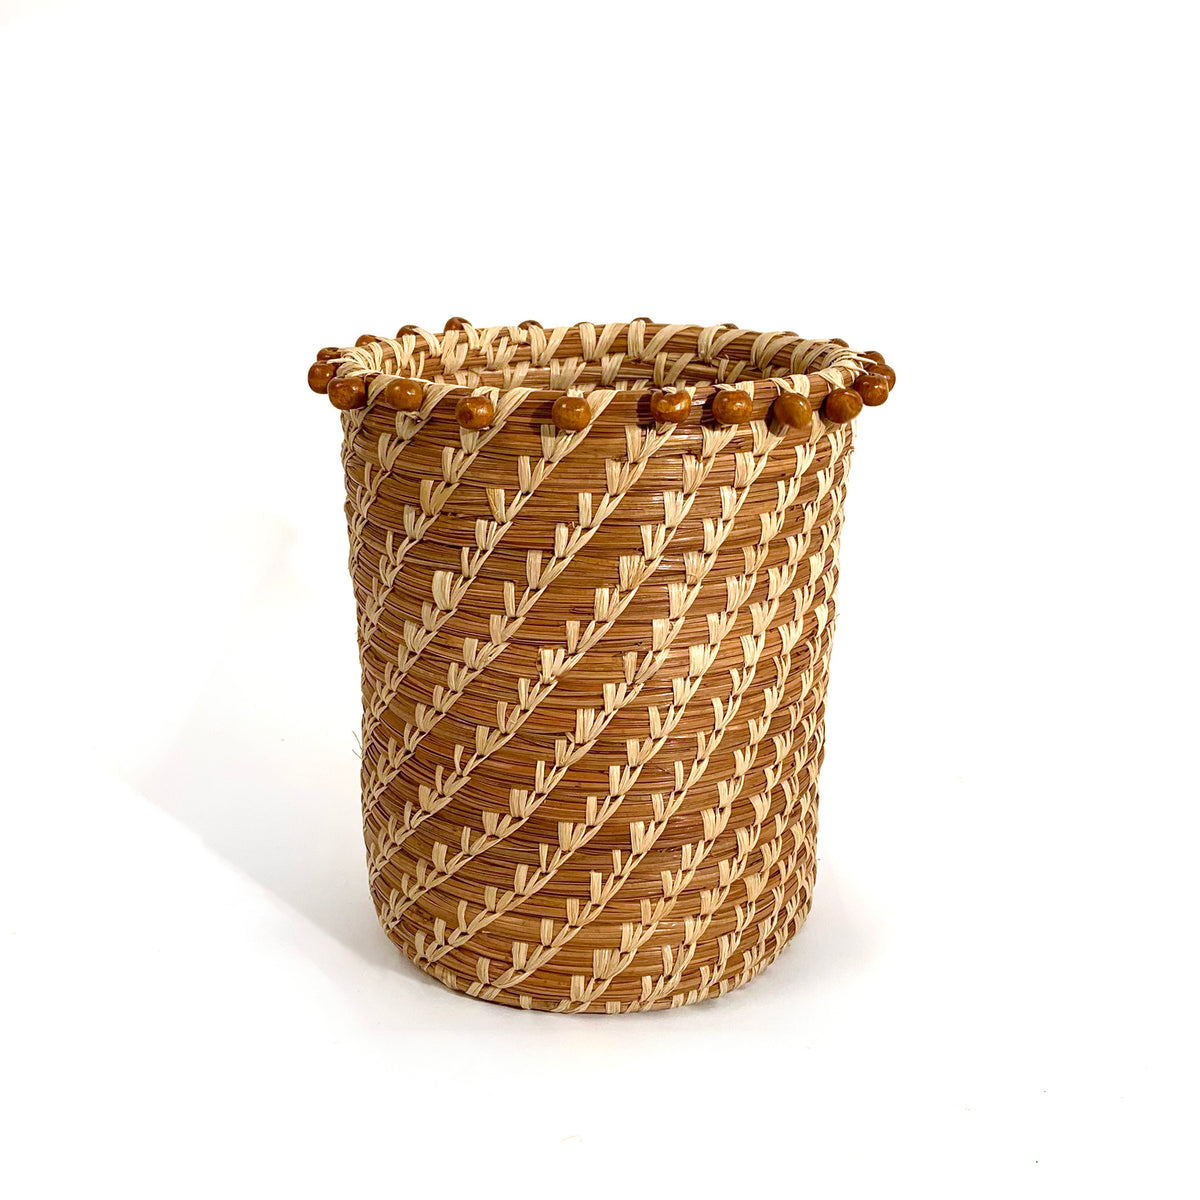 tall pine needle basket with wood beads at rim